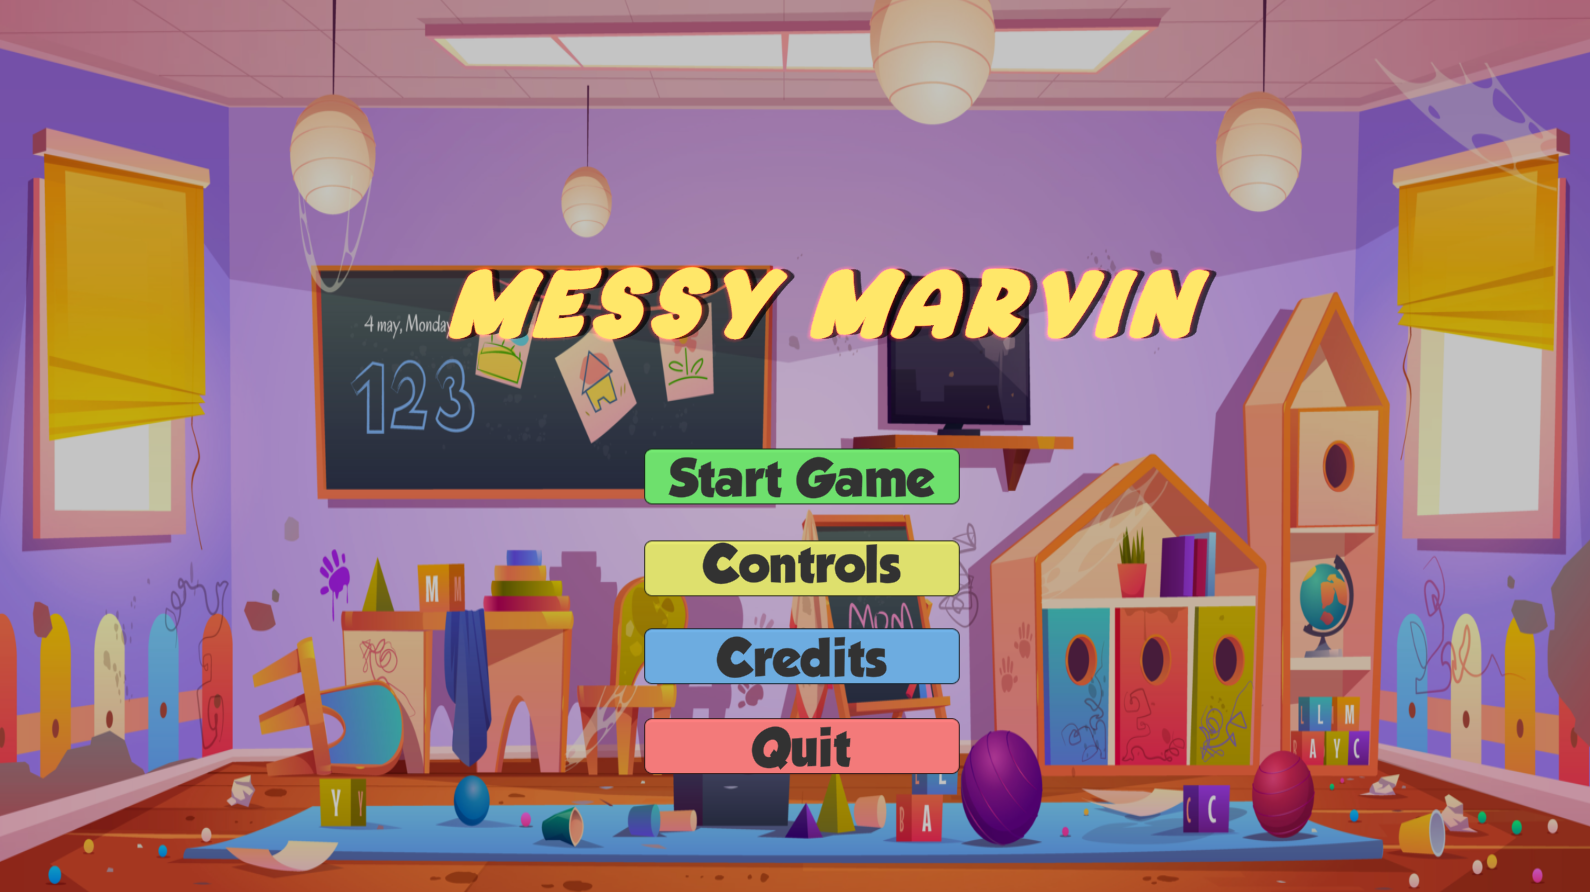 Messy Marvin